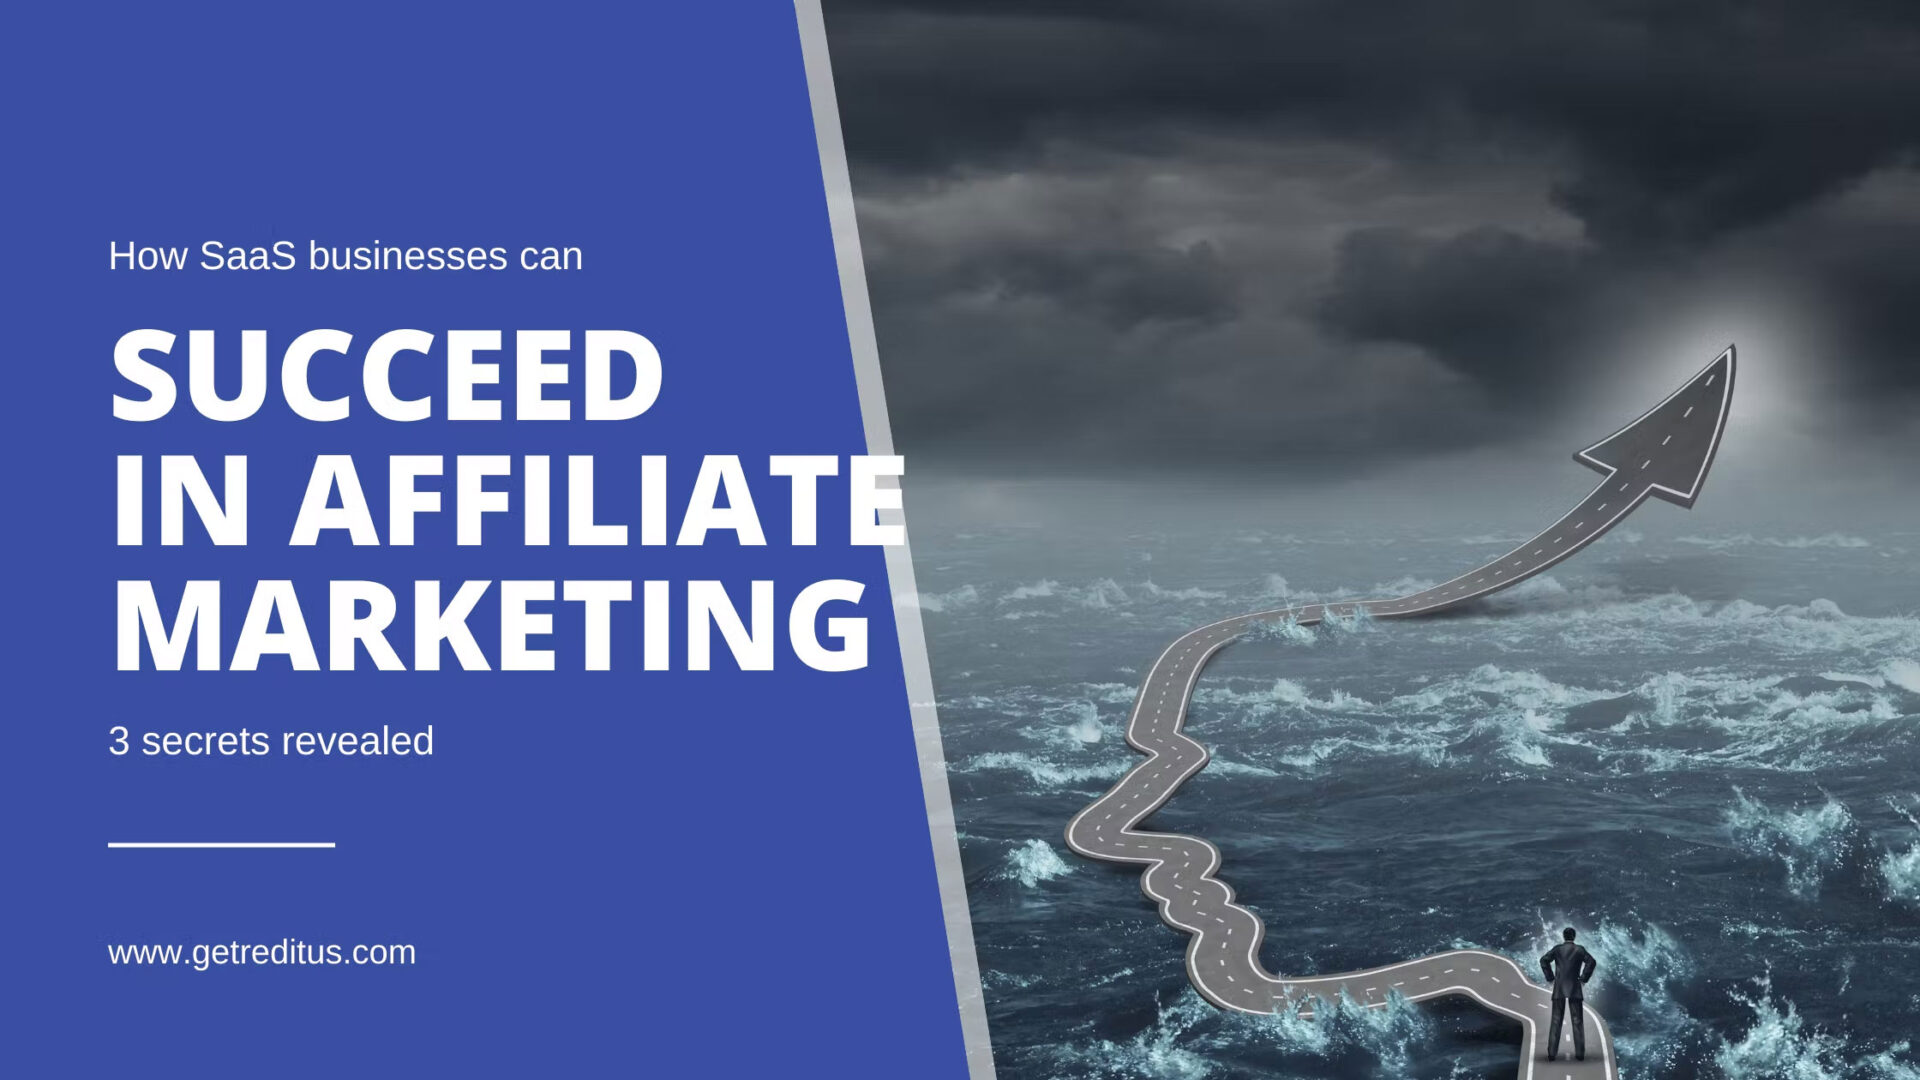 How SaaS Businesses Can Succeed in Affiliate Marketing